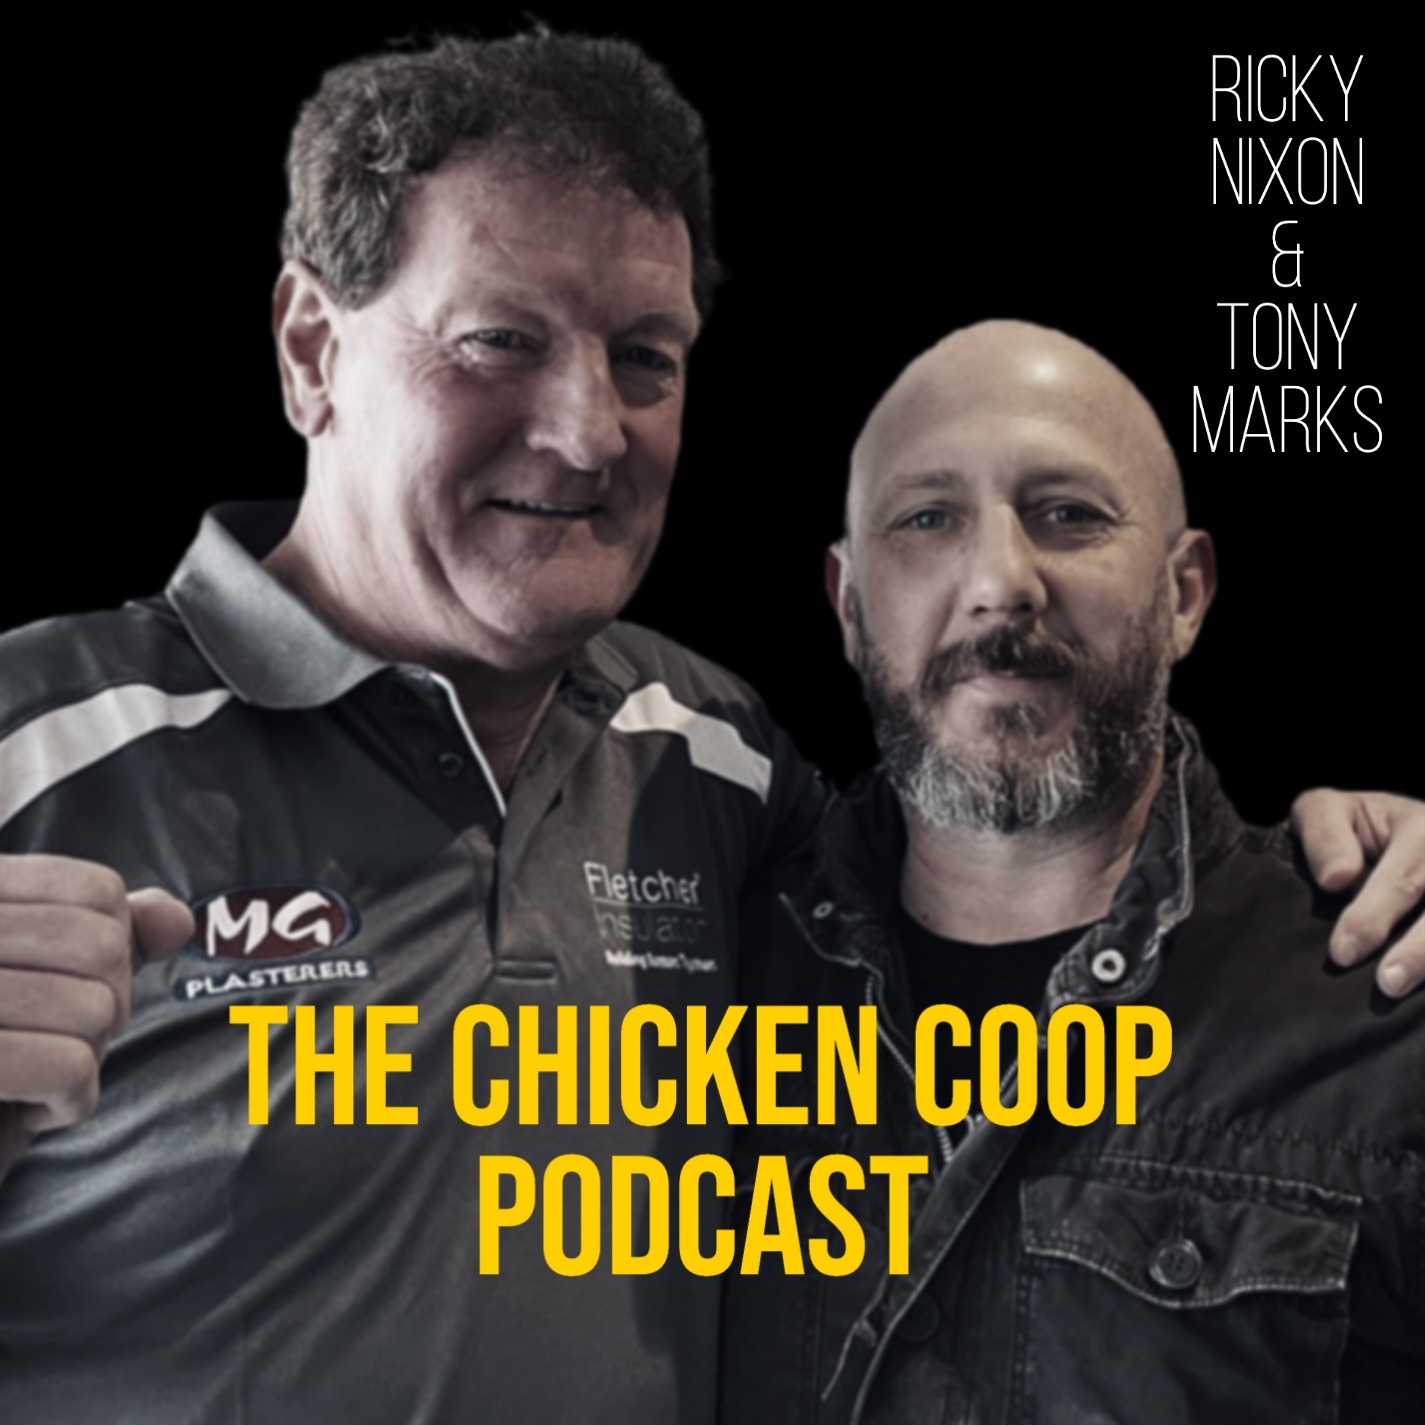 The Chicken Coop with Ricky Nixon & Tony Marks - Episode 5